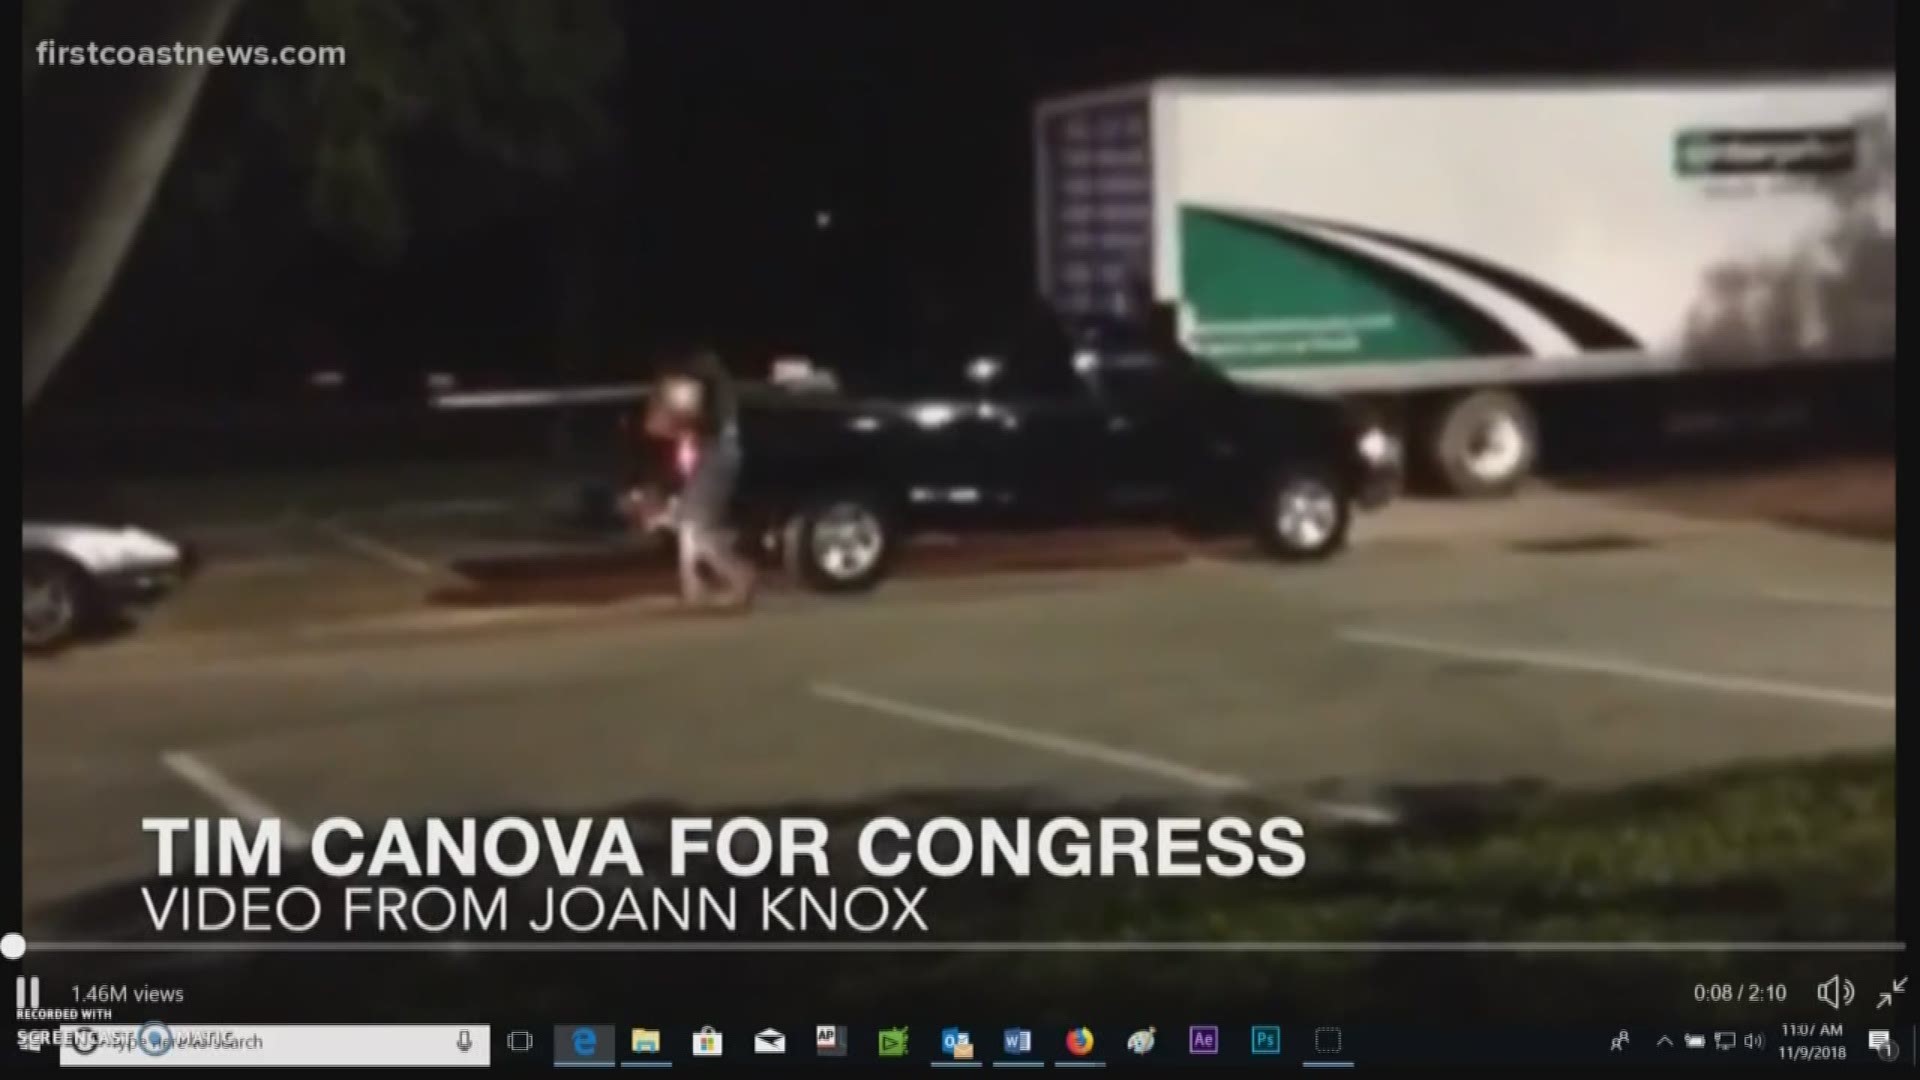 A video that appears to show Broward County poll workers transporting ballots in their personal cars is getting thousands of views and shares on social media. Is it real?